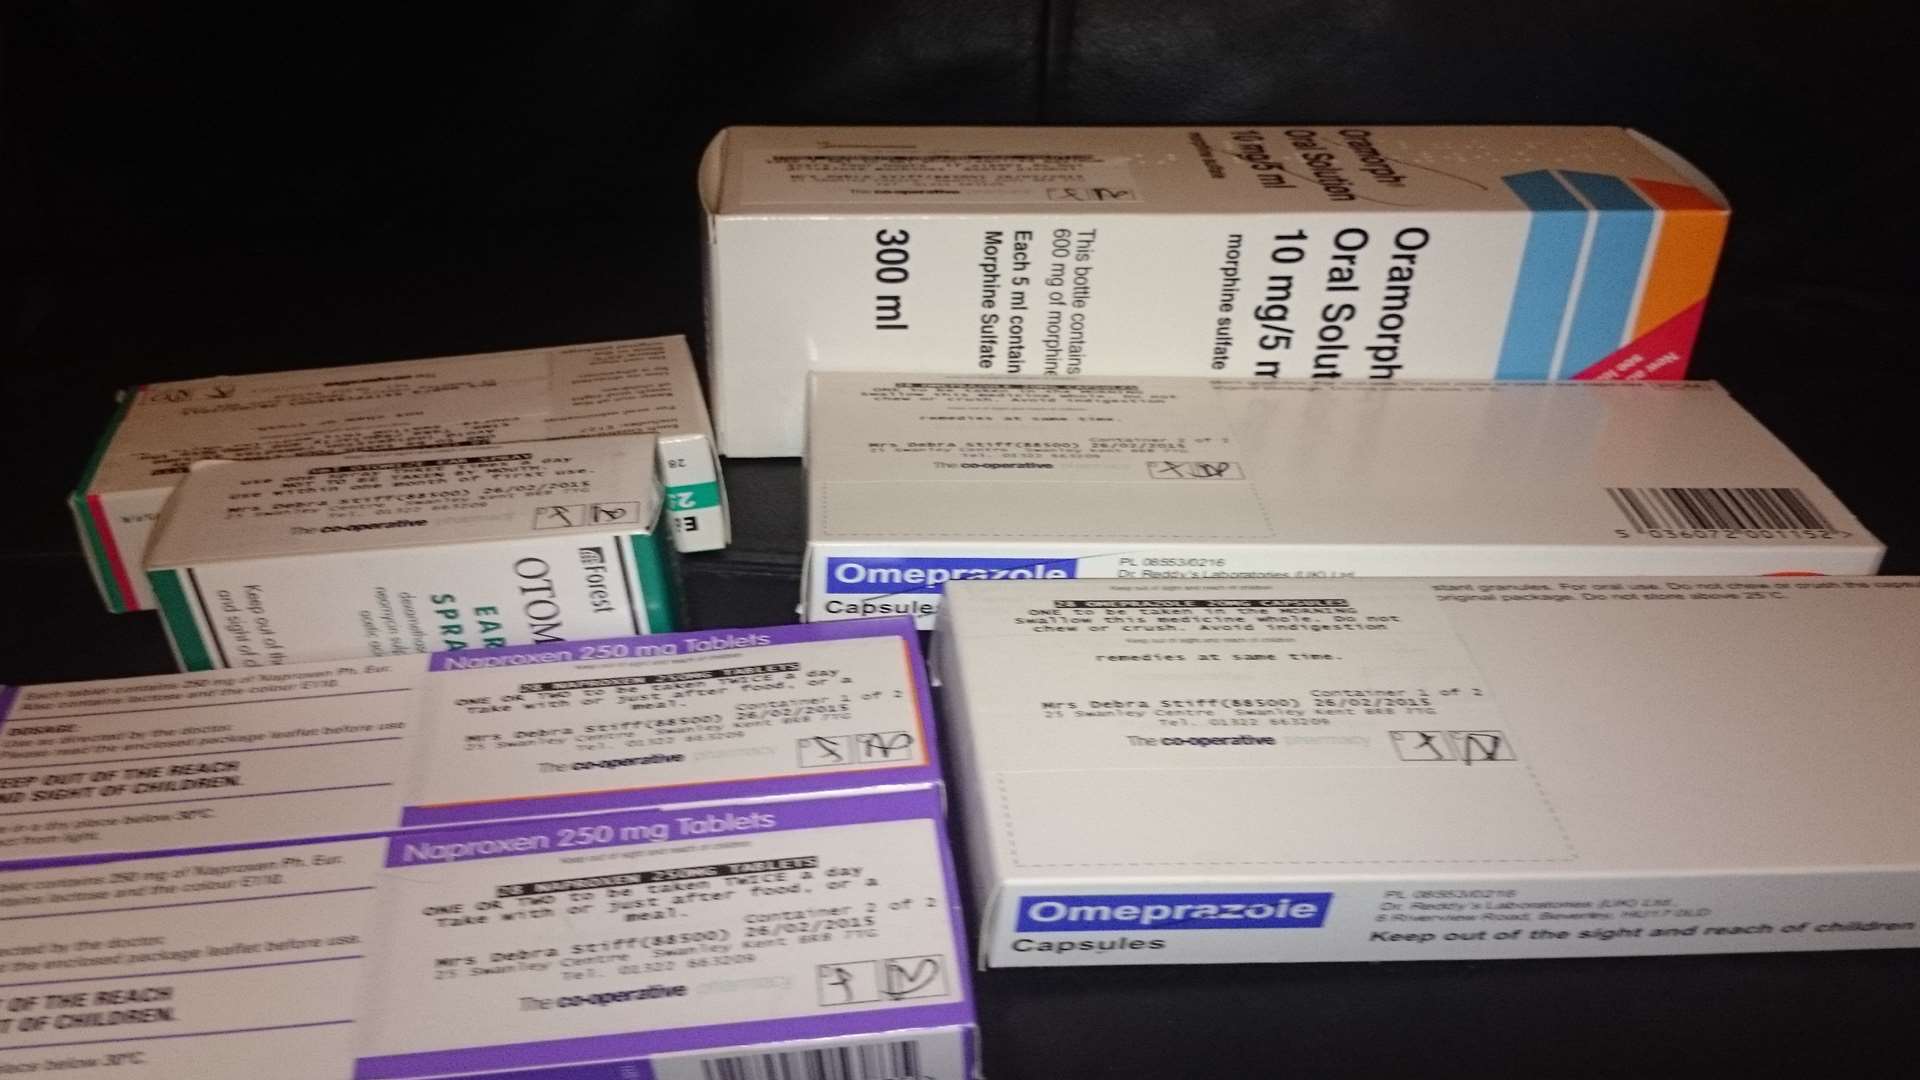 Gary Stiff's medication with labels all incorrectly bearing Mrs Stiff's name